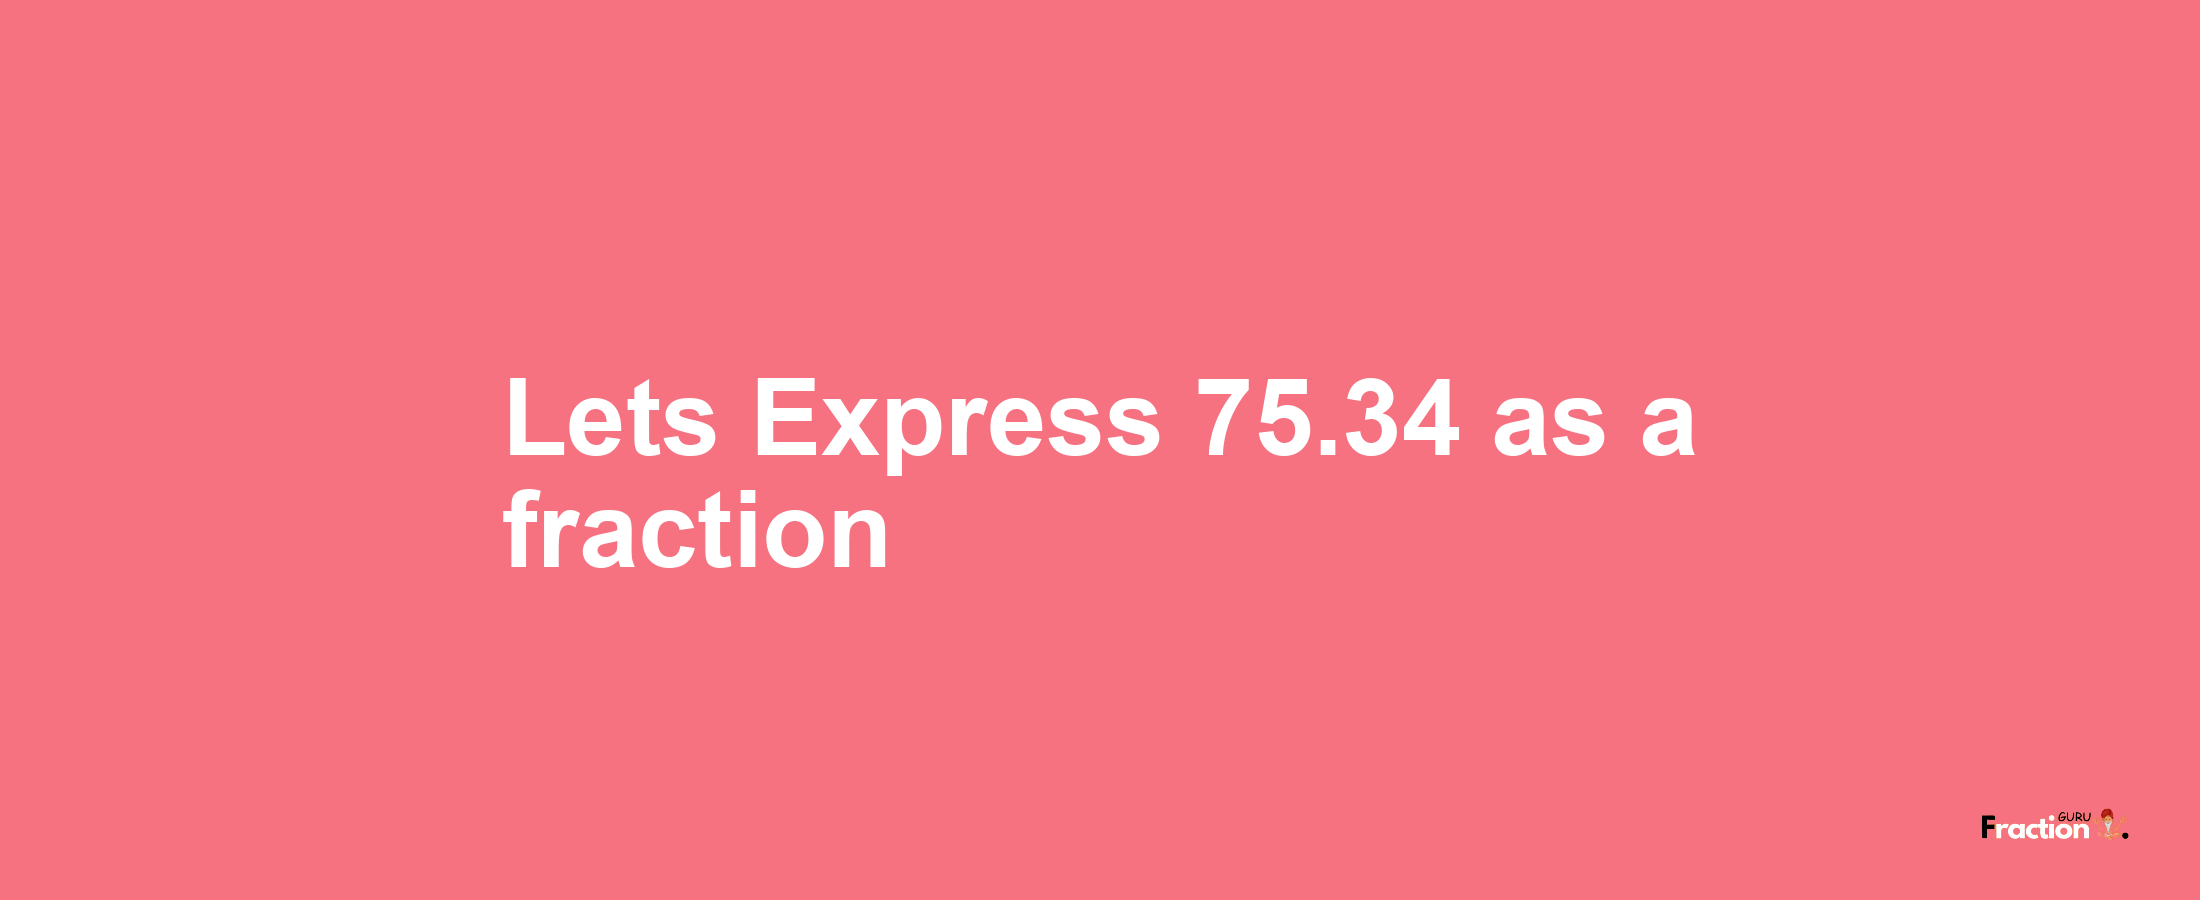 Lets Express 75.34 as afraction